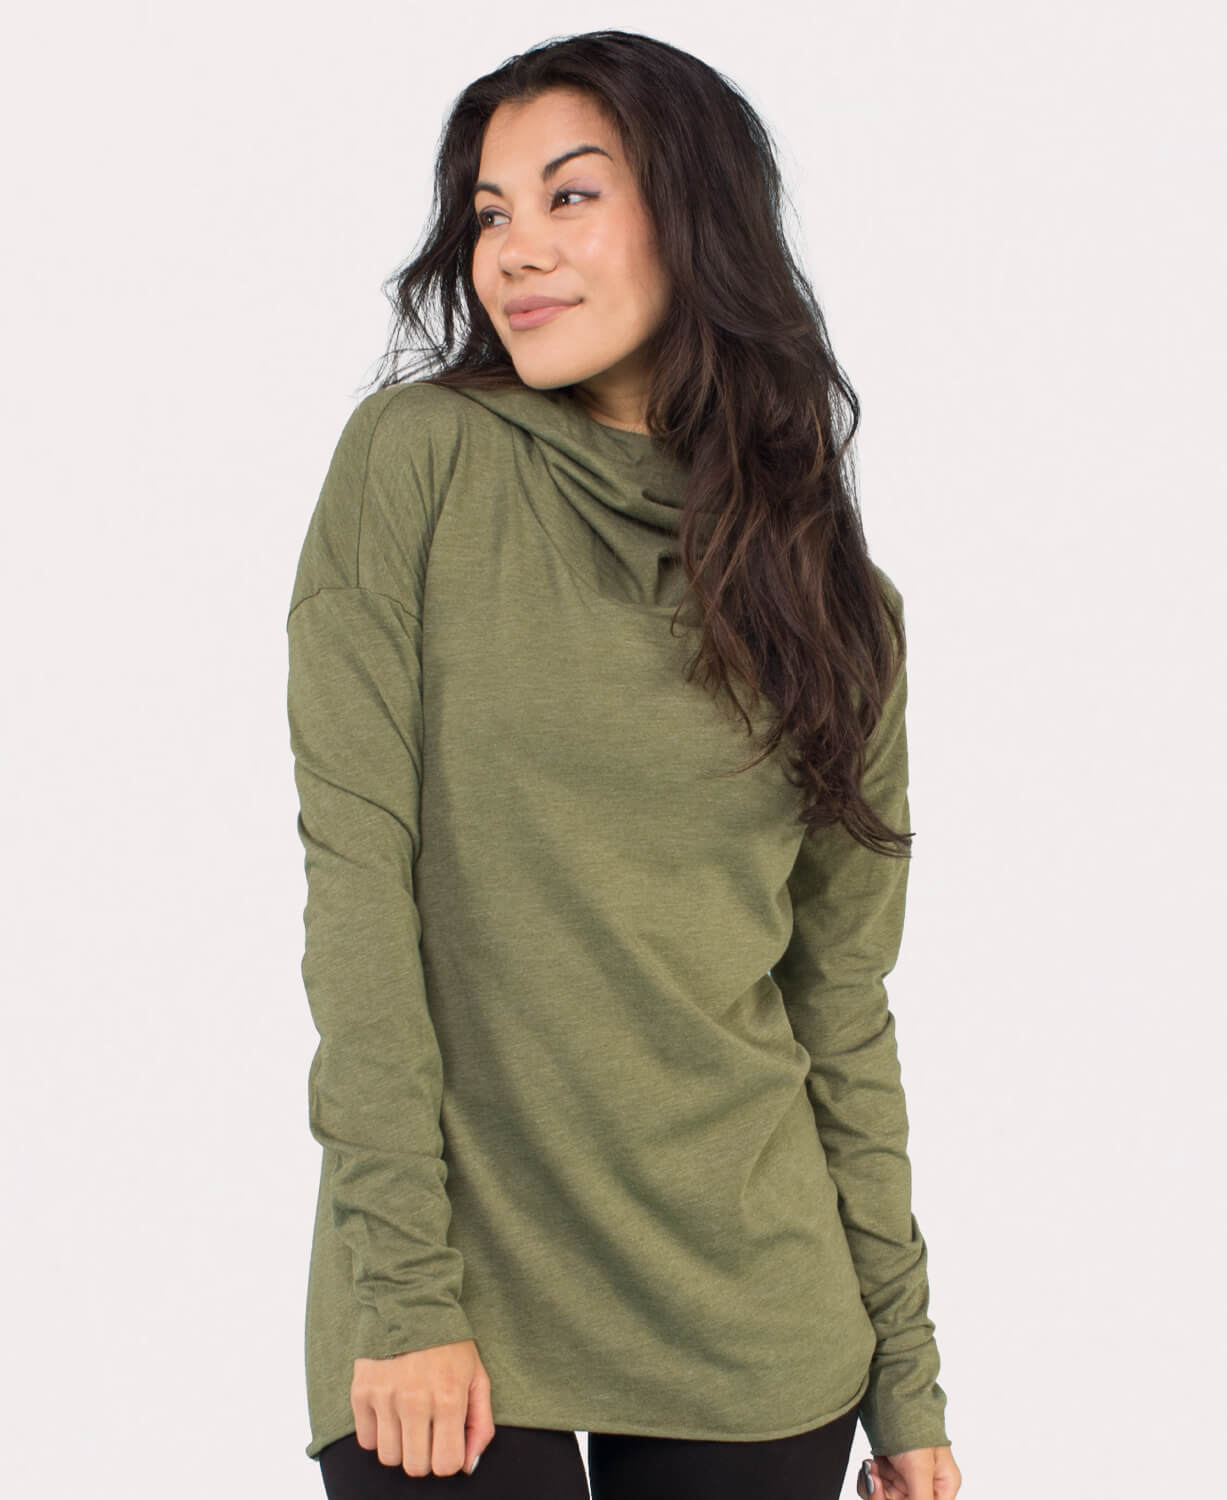 The Resistance Cowl Neck Hoody - Eco Olive